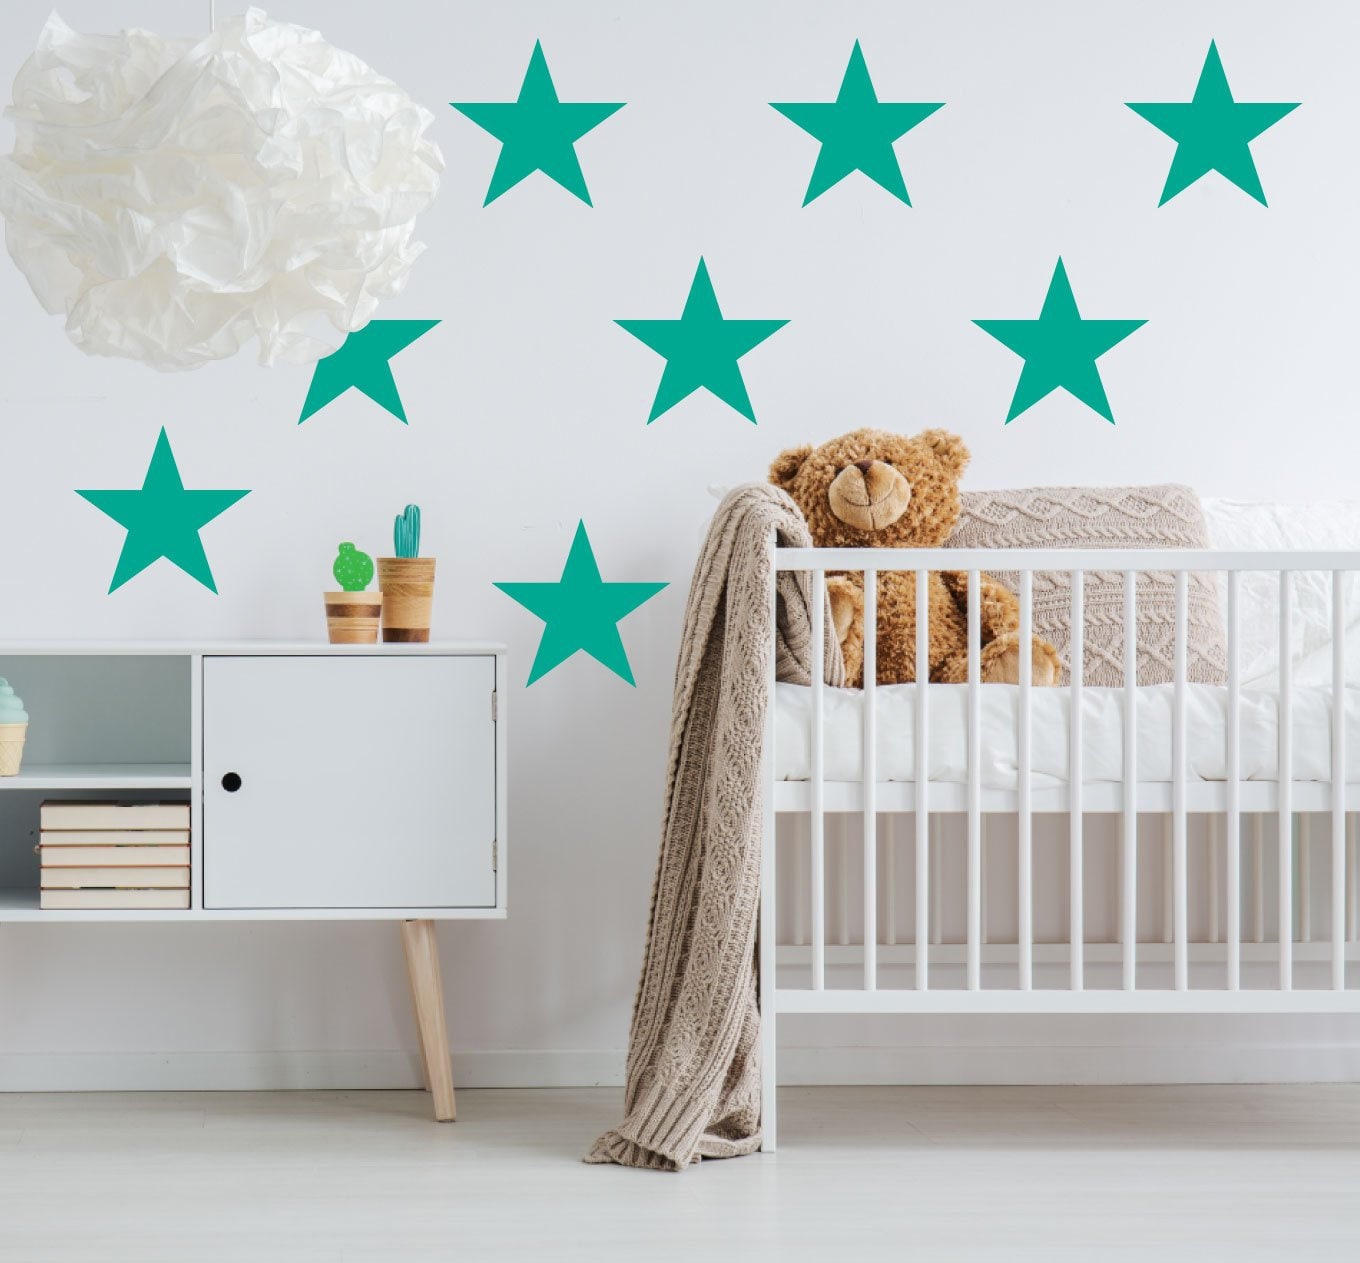 Large Star Wall Stickers, Star Wall Decals, Nursery Wall Art, Wall Art Stickers, Kids Wall Stickers, Baby Wall Stickers, Childrens Decals